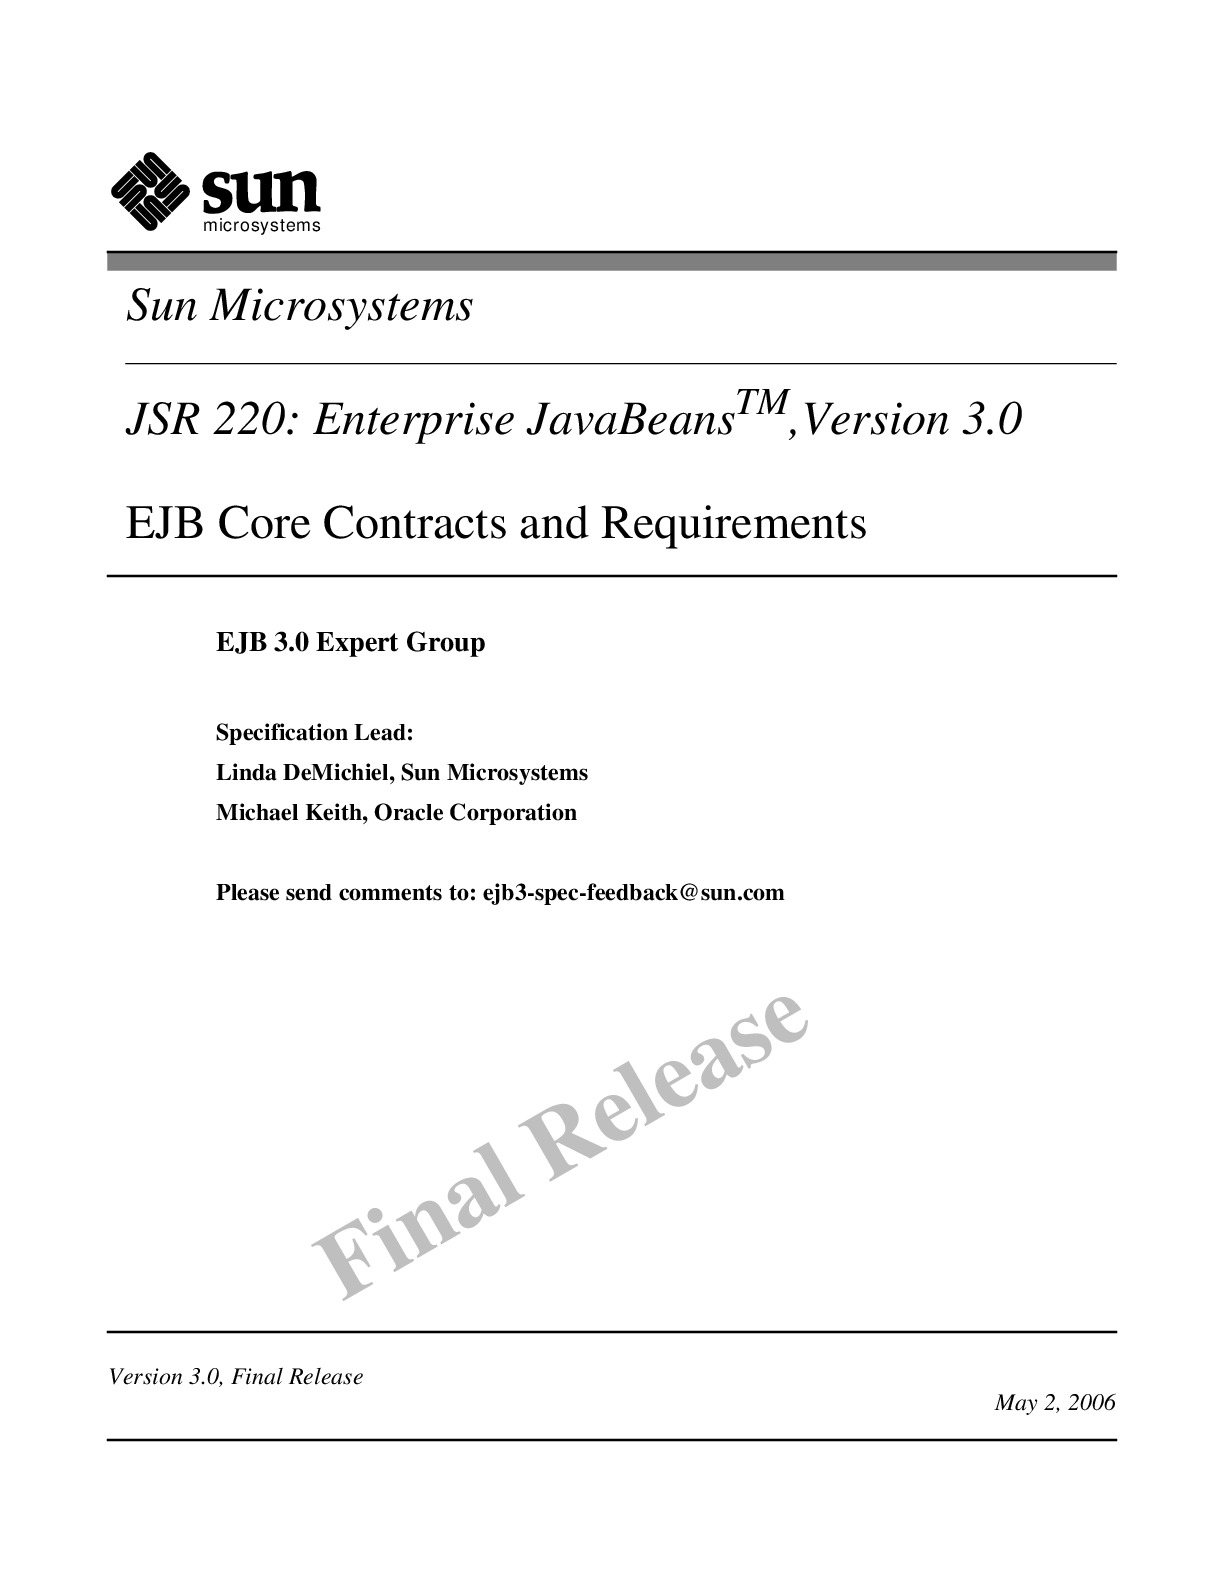 [JAVA][Enterprise JavaBeans 3.0 EJB Core Contracts and Requirements]